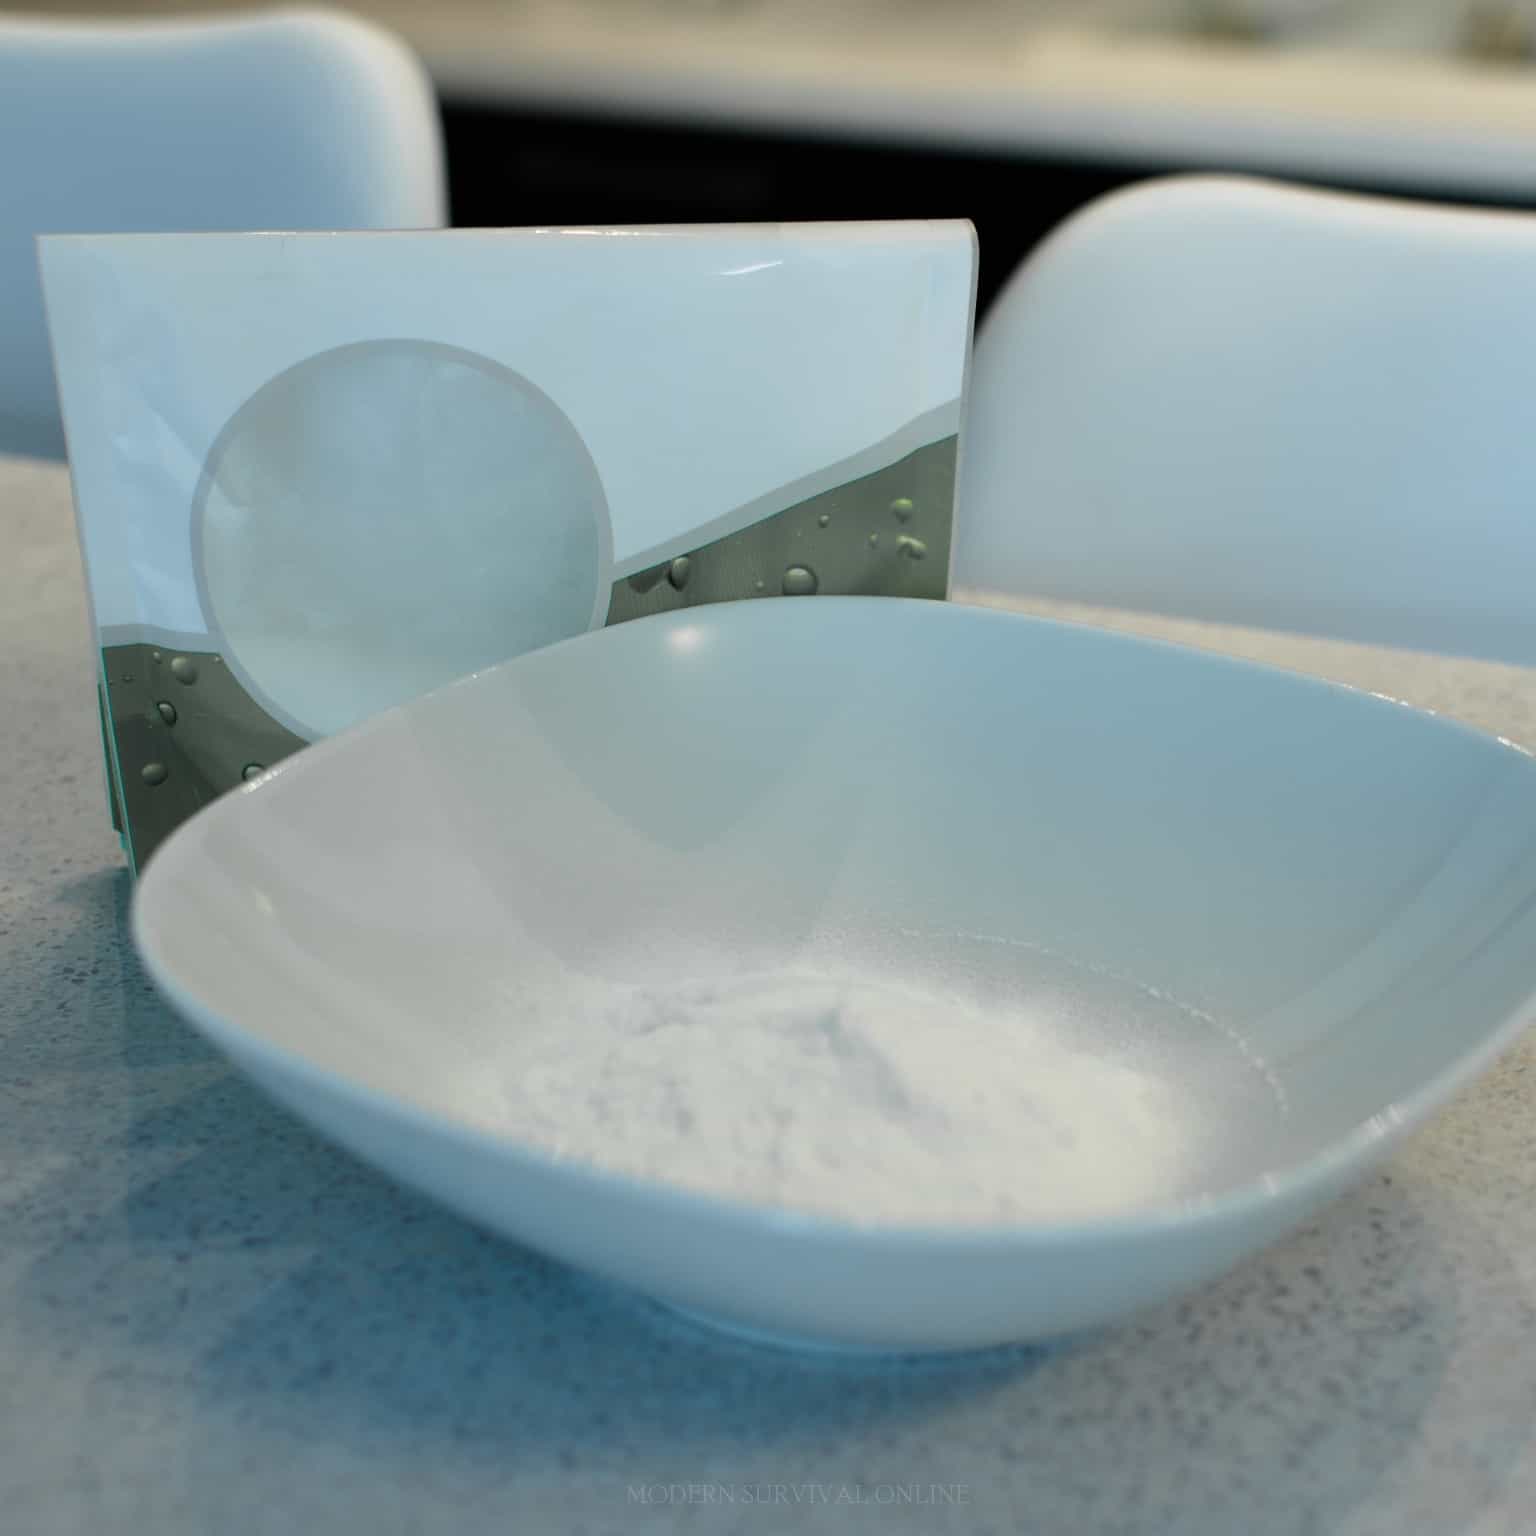 baking soda in bowl on kitchen counter